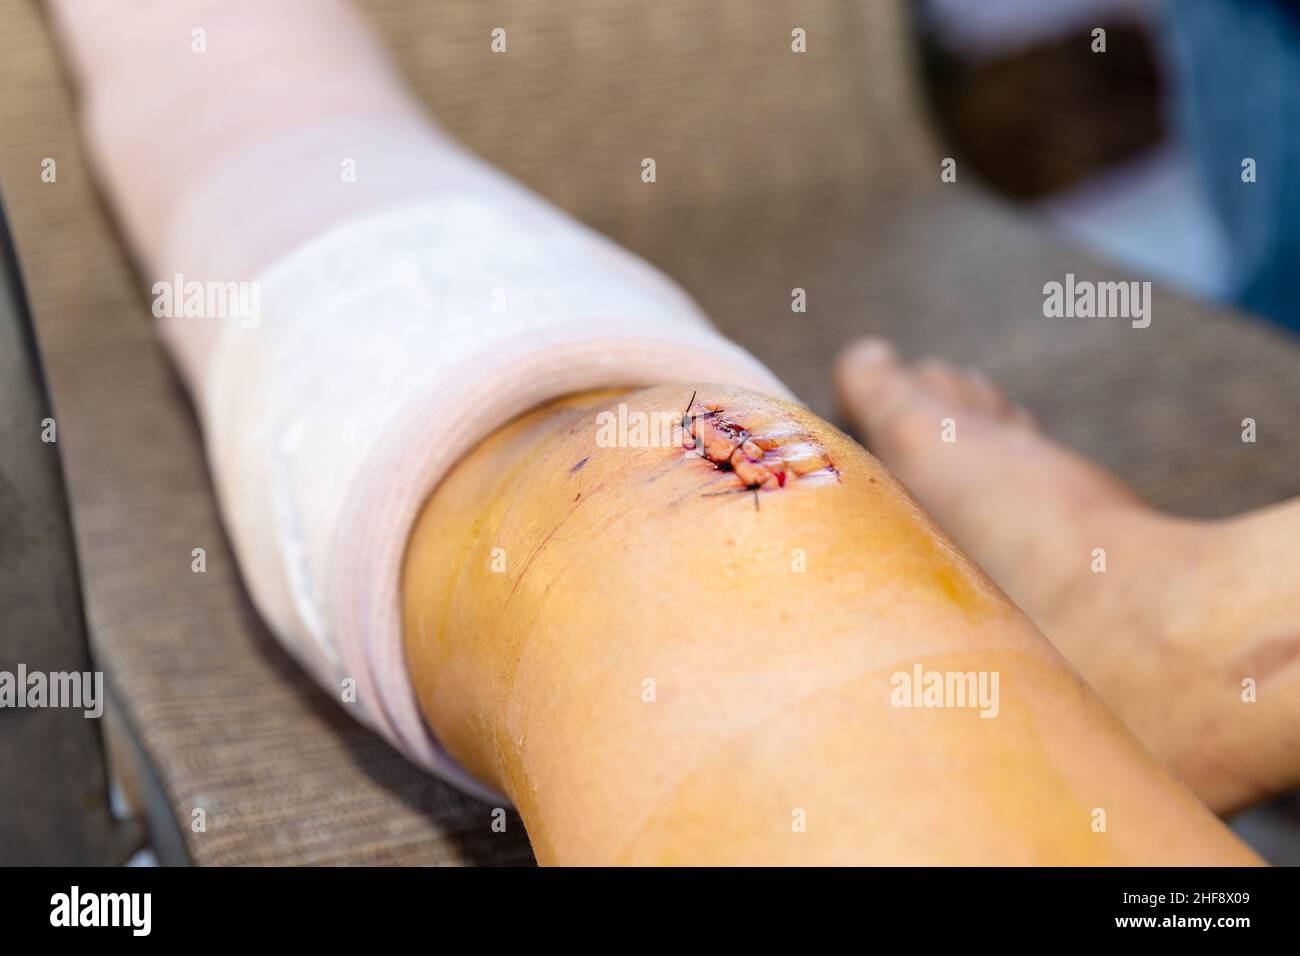 new wound and stitches after surgery Stock Photo